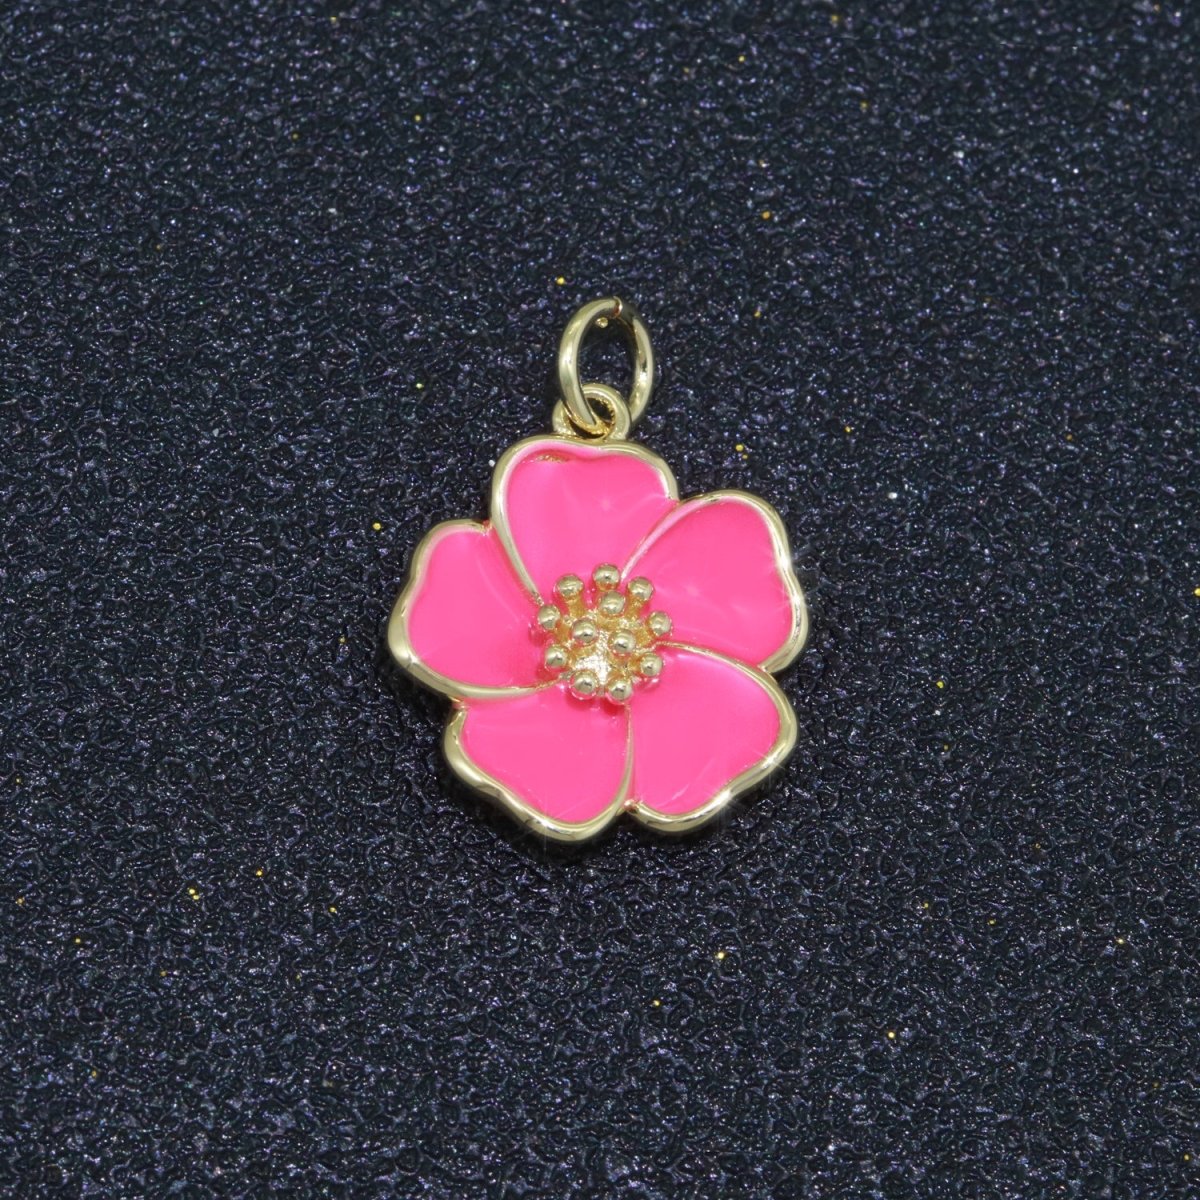 Dainty Hibiscus Charm Tropical Flower Gold Filled Enamel Charm Hawaiian Inspired Jewelry Pendant for Necklace Bracelet Earring Component M-499 - M-507 - DLUXCA